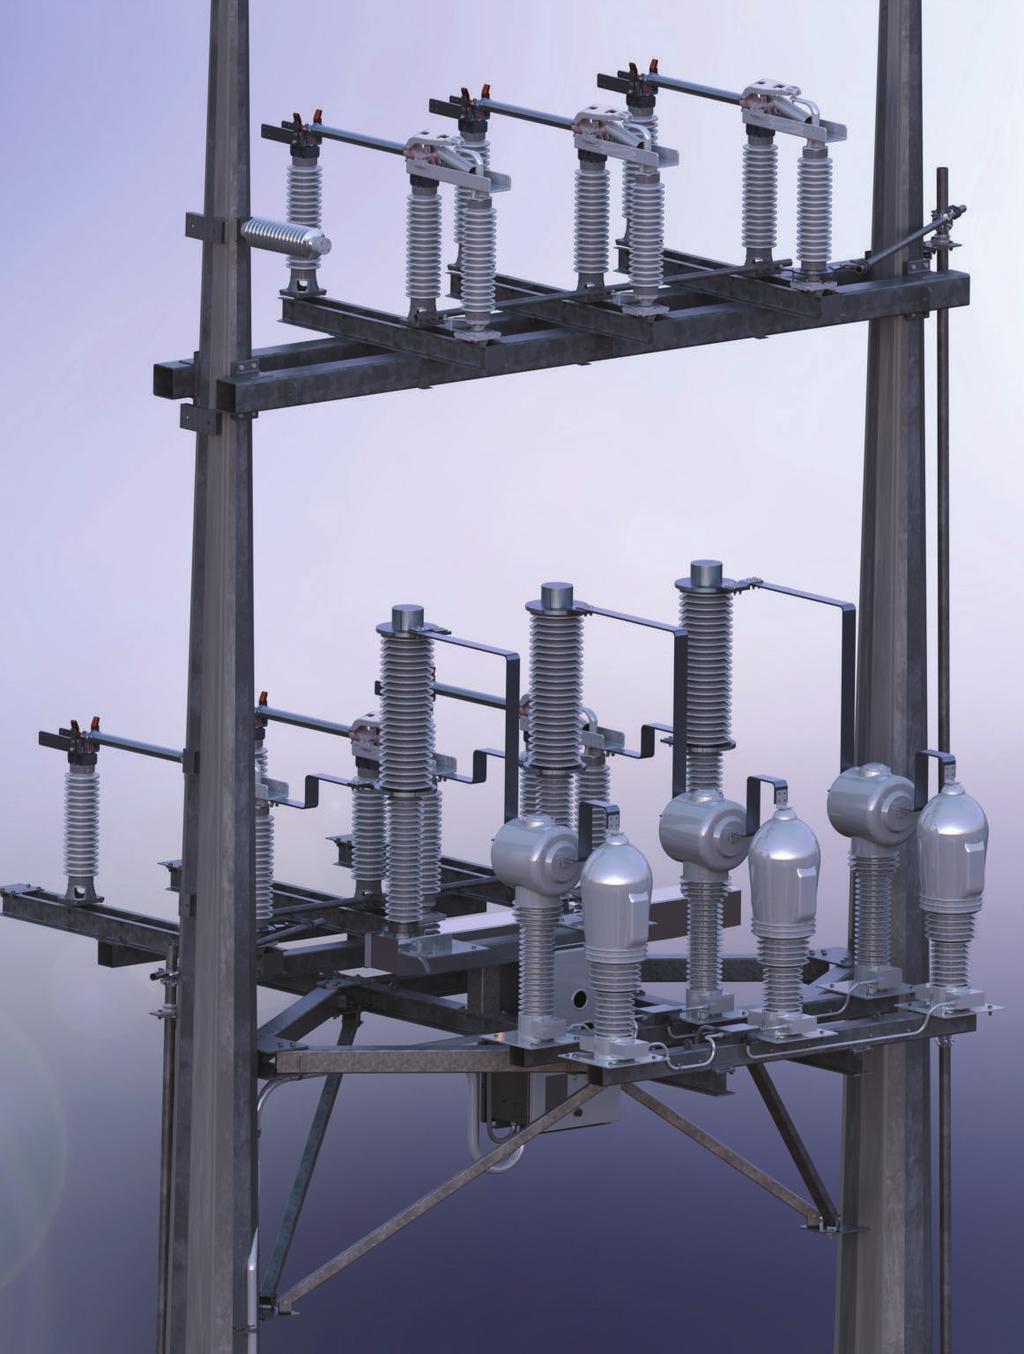 SUBSTATION IN THE SKY For unique transmission application challenges, Southern States offers specialized solutions.